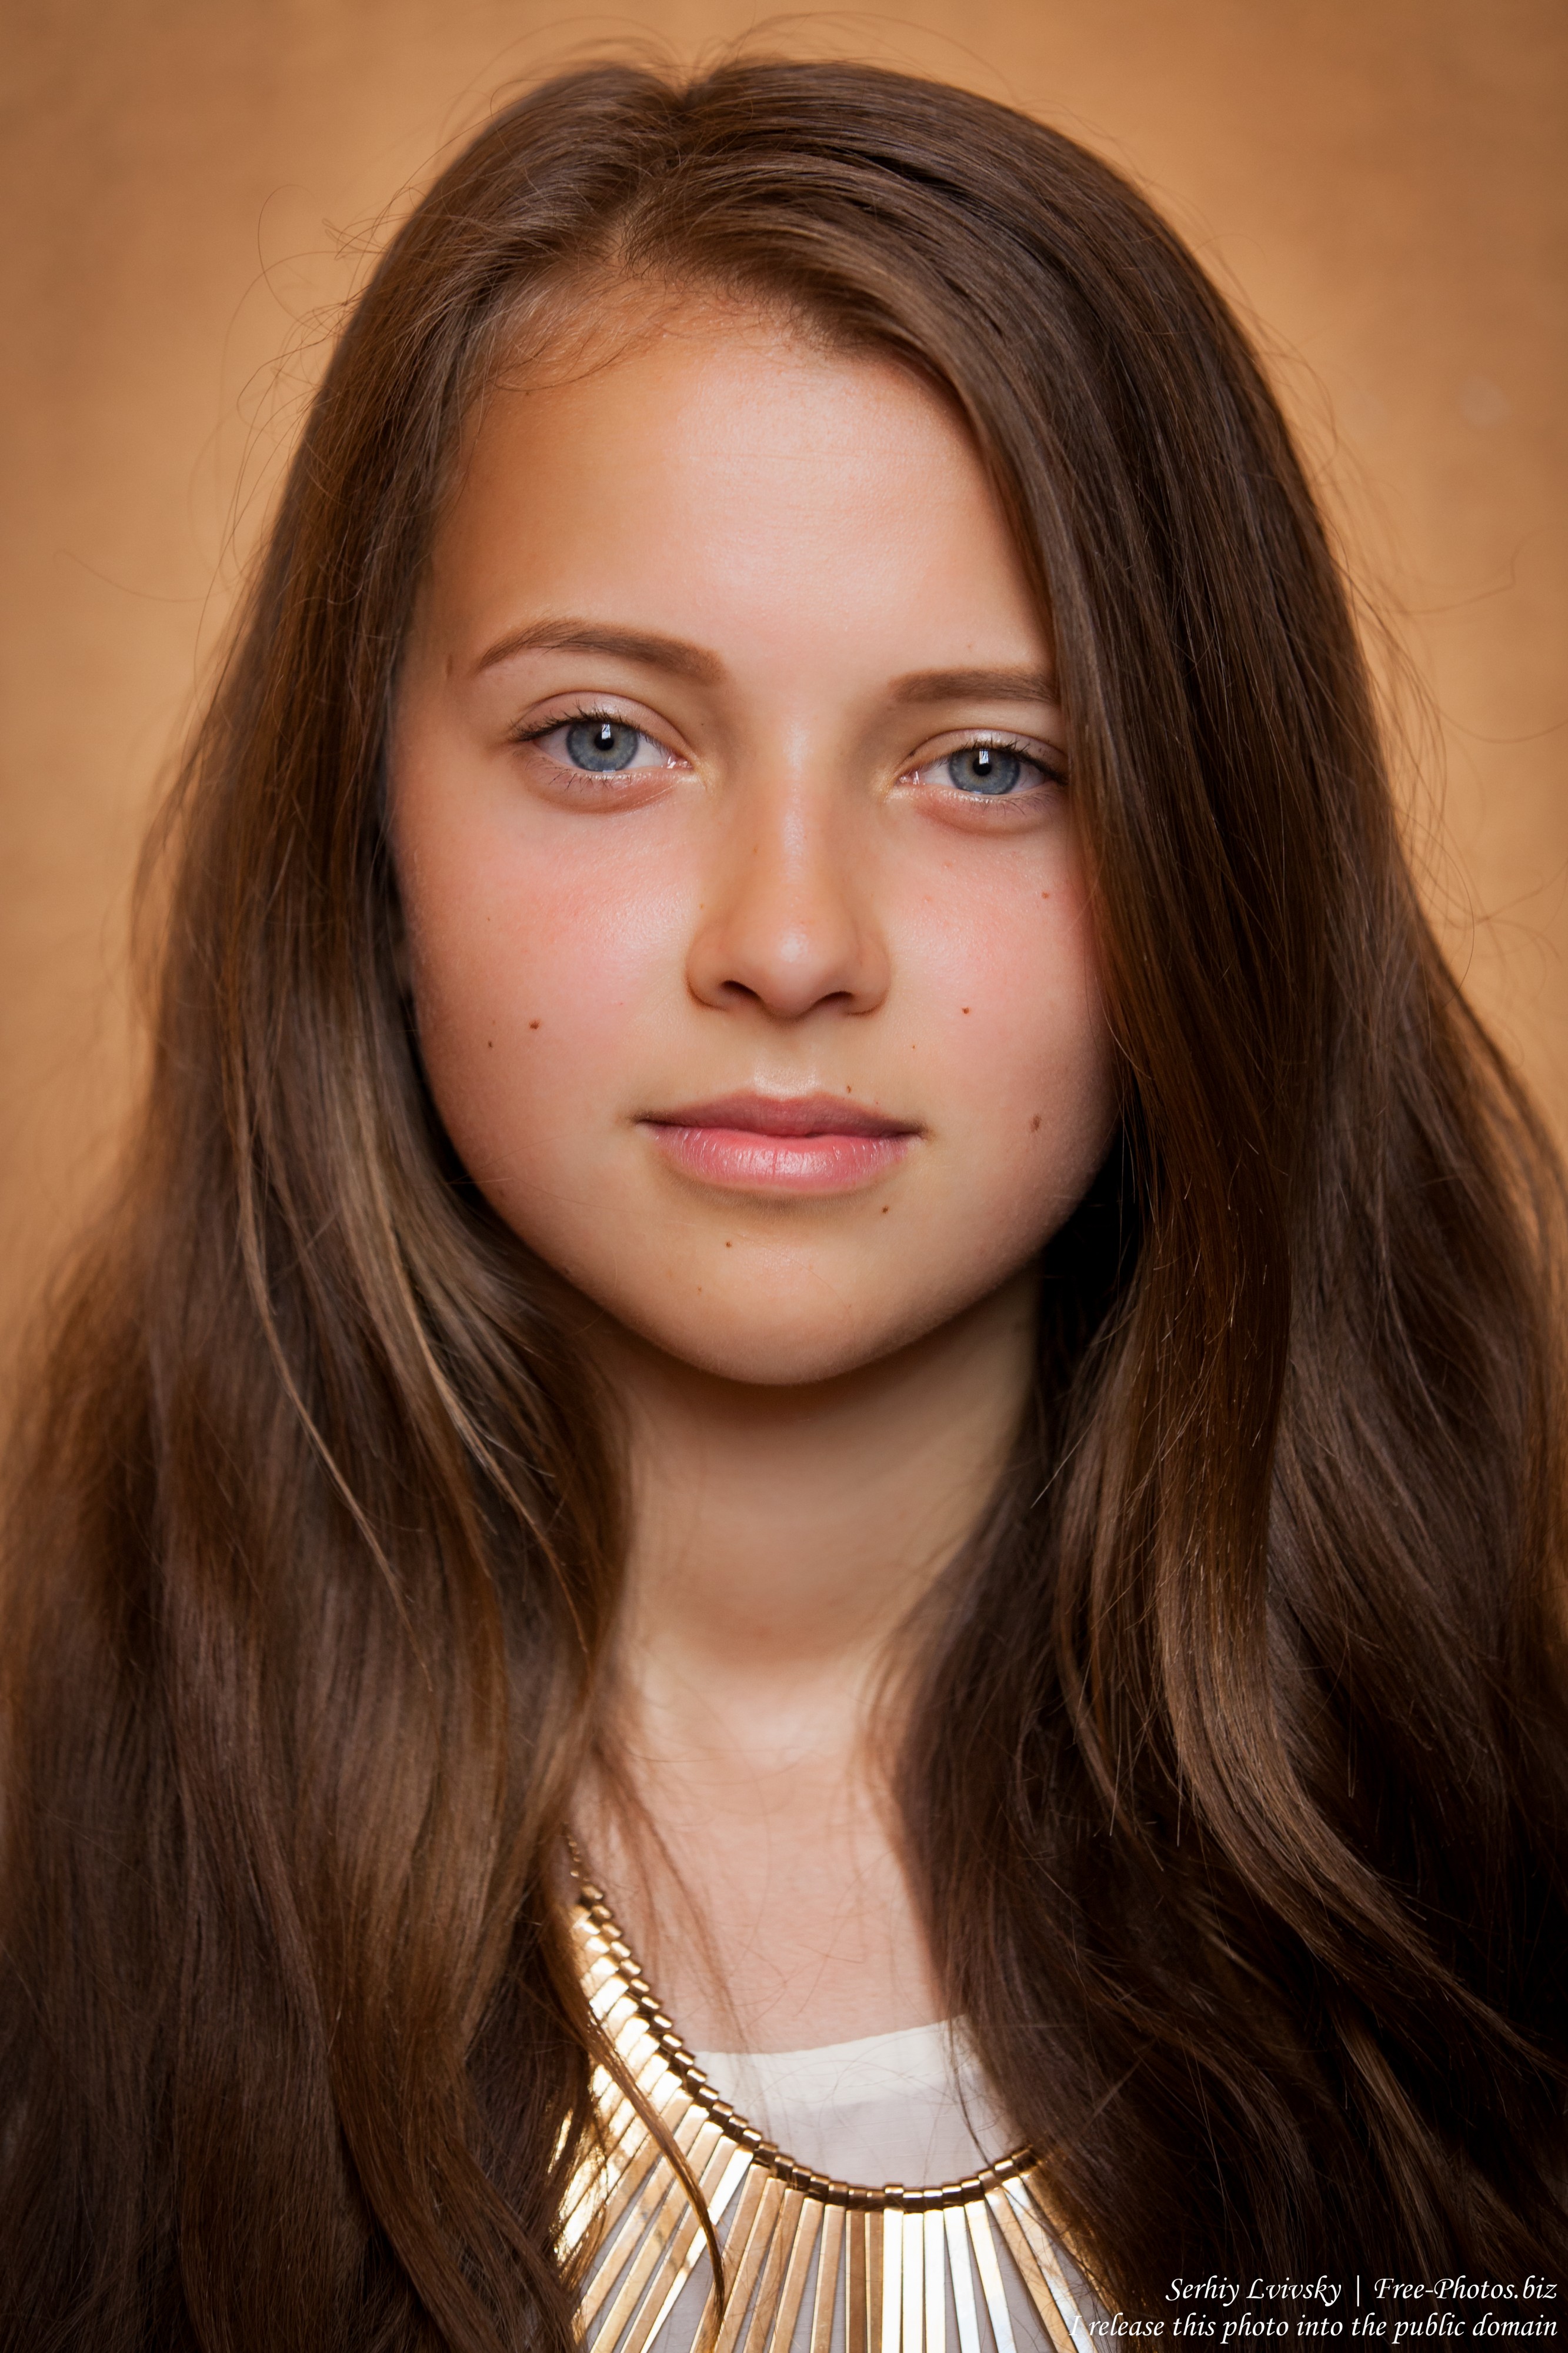 a cute 15-year old girl photographed in July 2015, picture 6